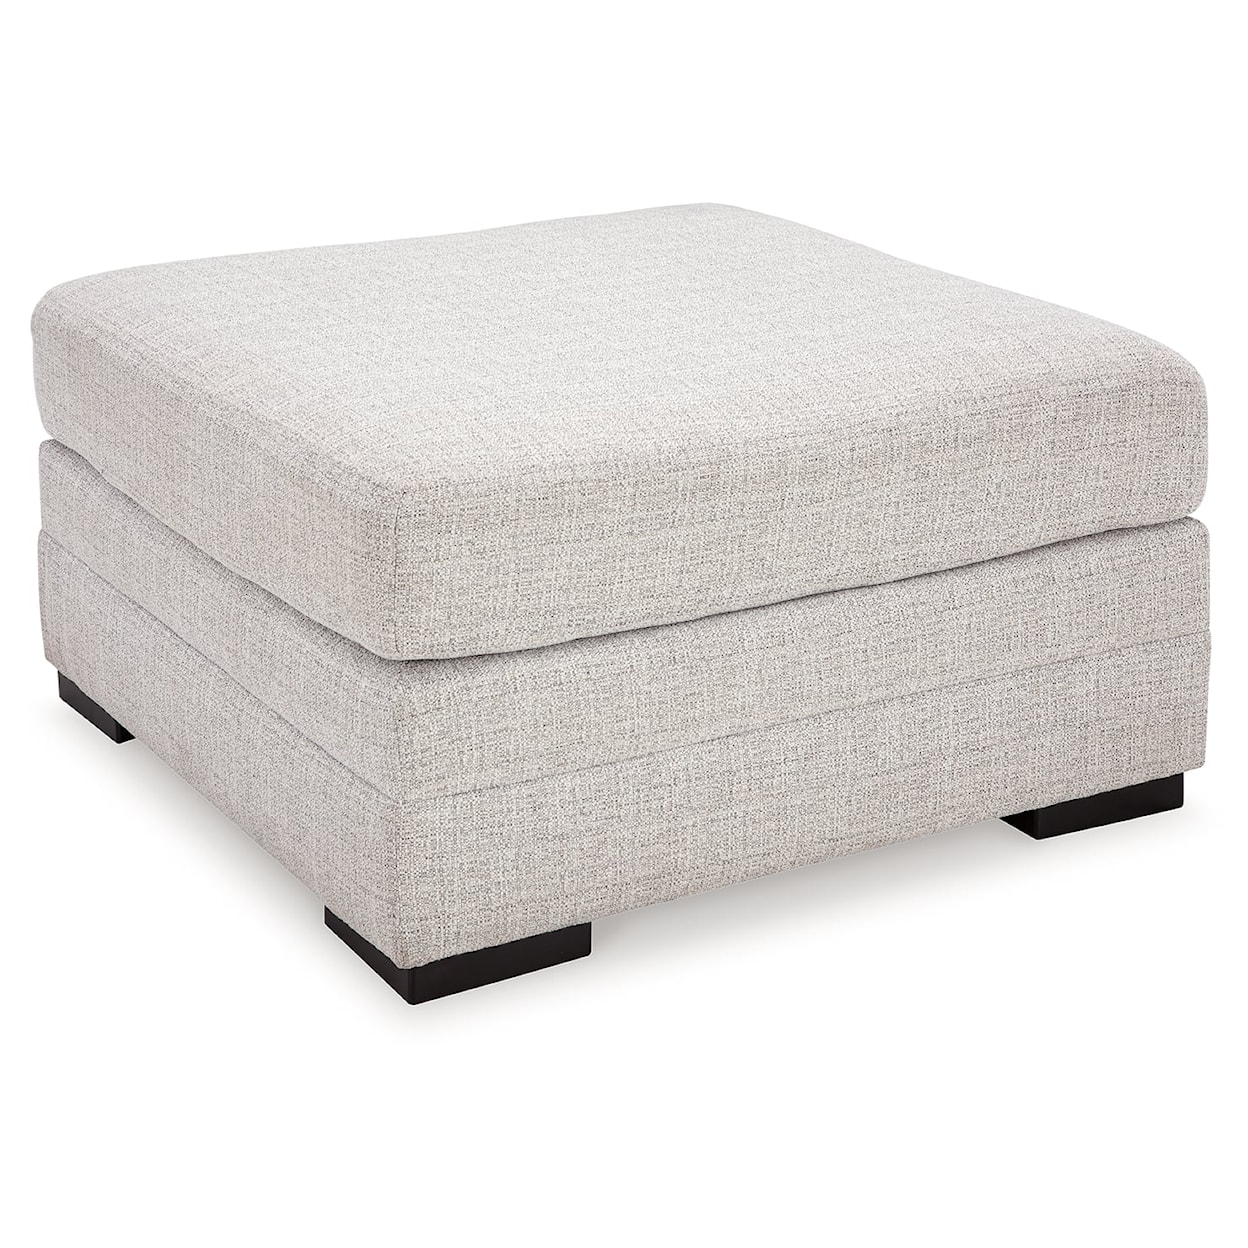 Benchcraft Kennedy Oversized Accent Ottoman